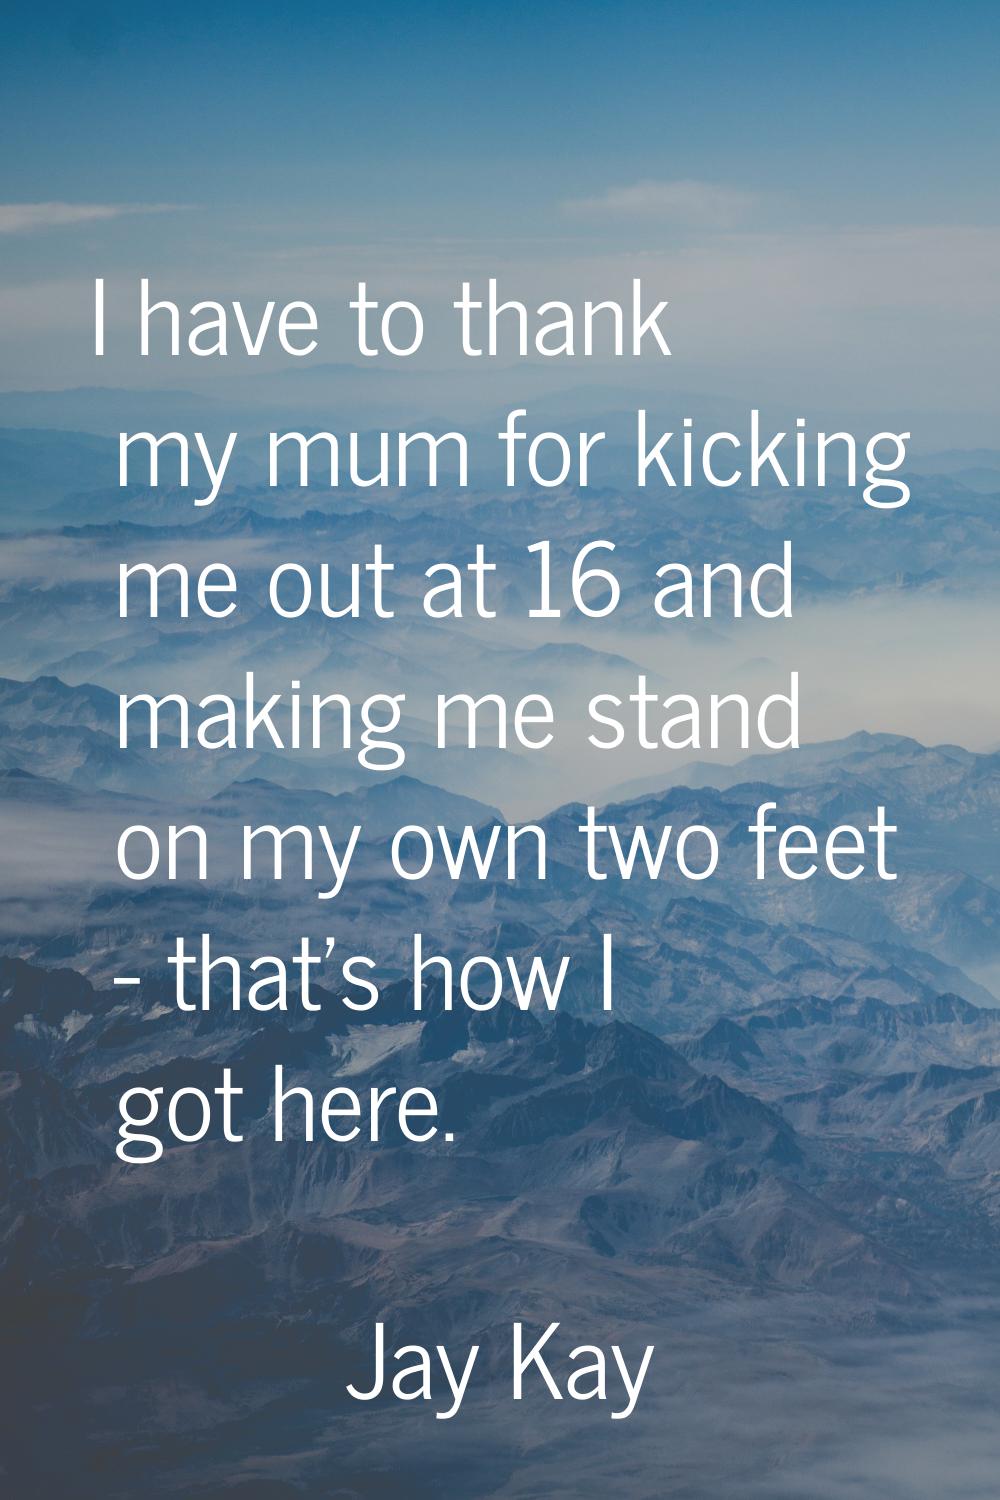 I have to thank my mum for kicking me out at 16 and making me stand on my own two feet - that's how